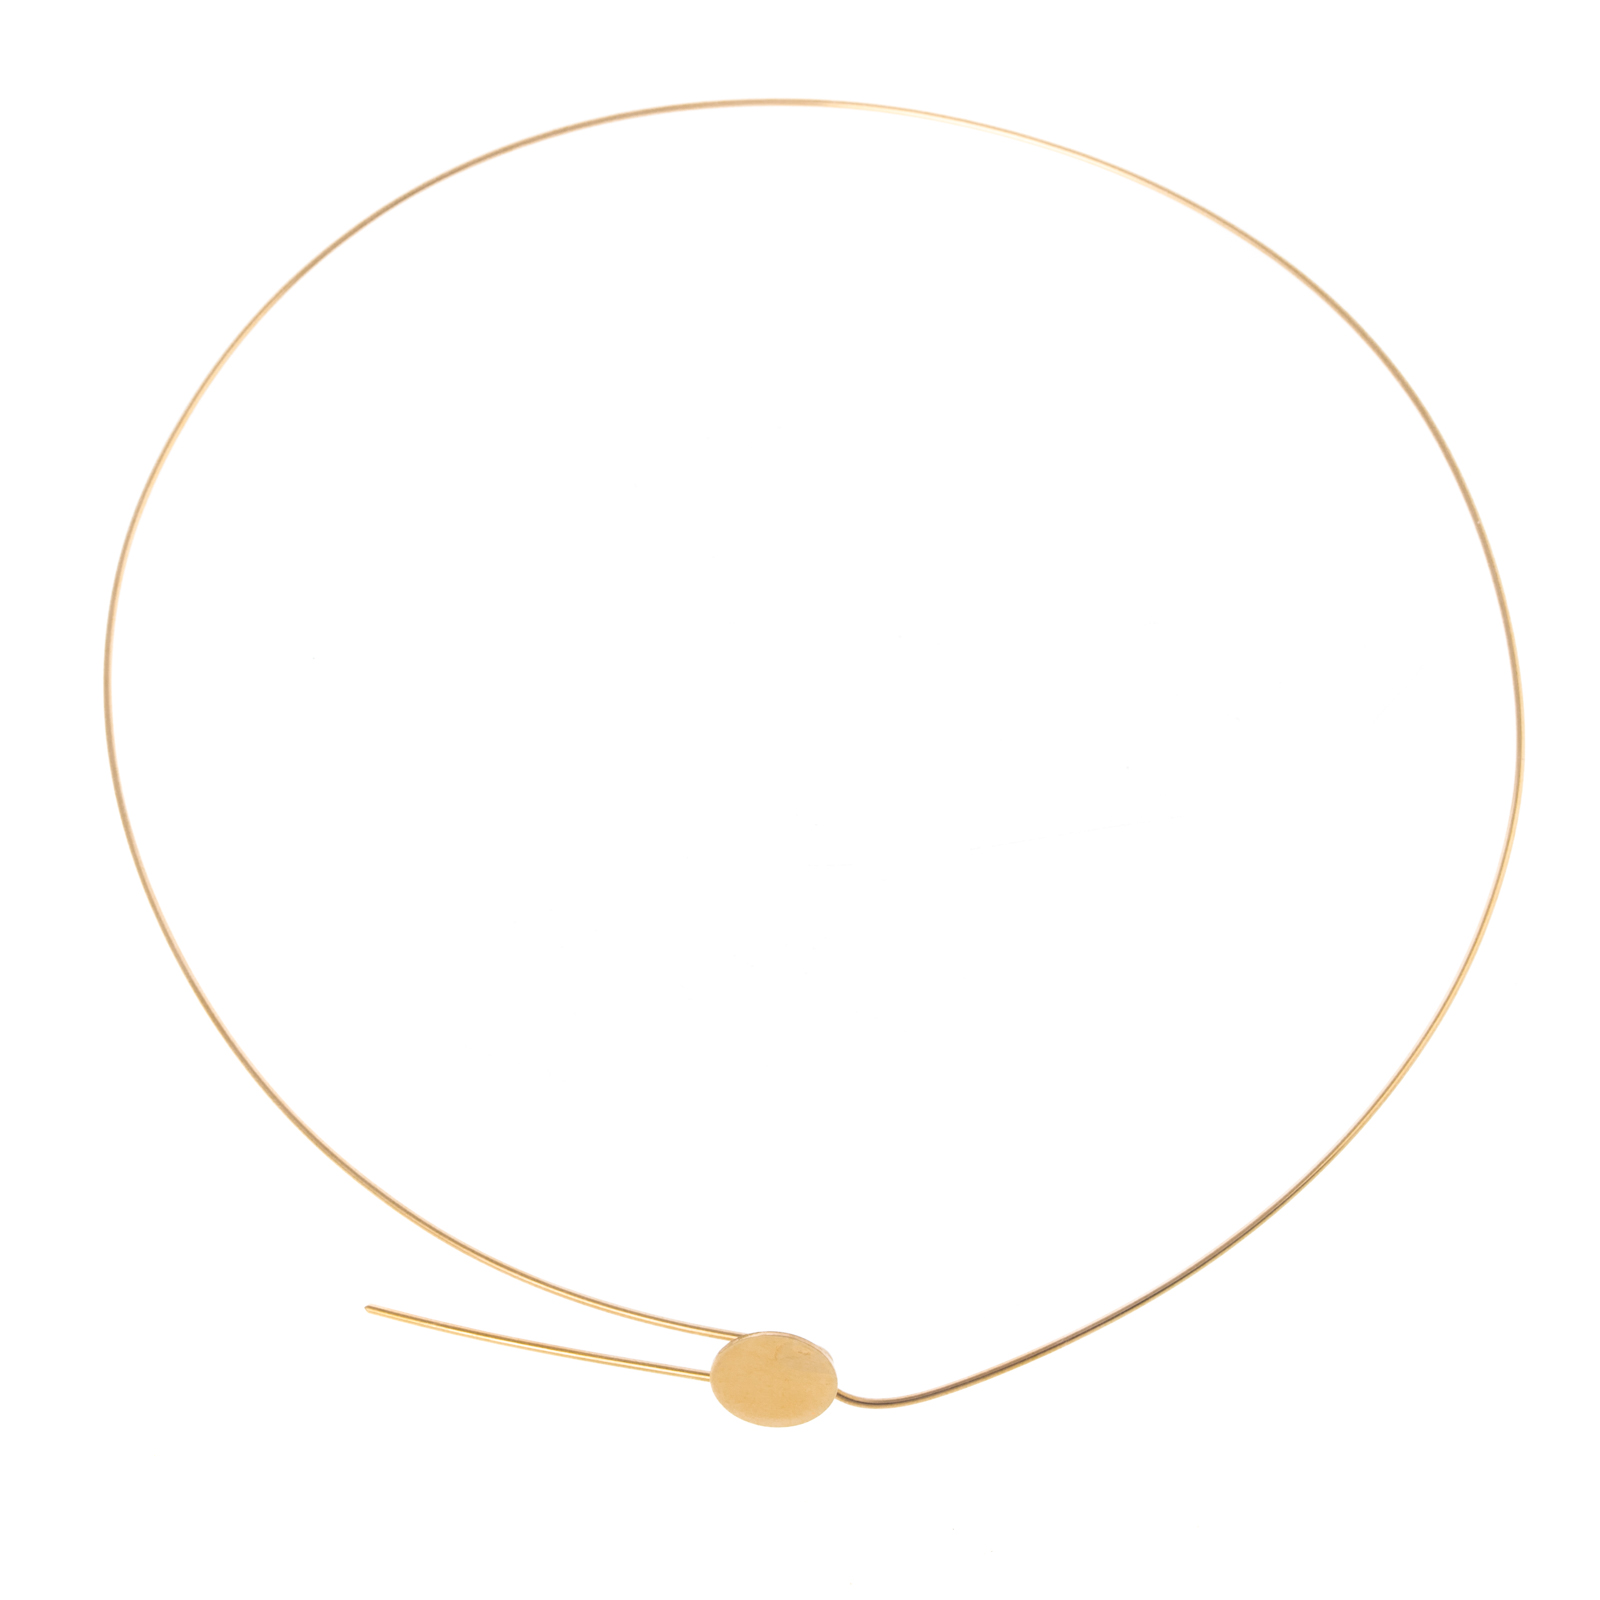 A 14K YELLOW GOLD WIRE NECKLACE 3385da